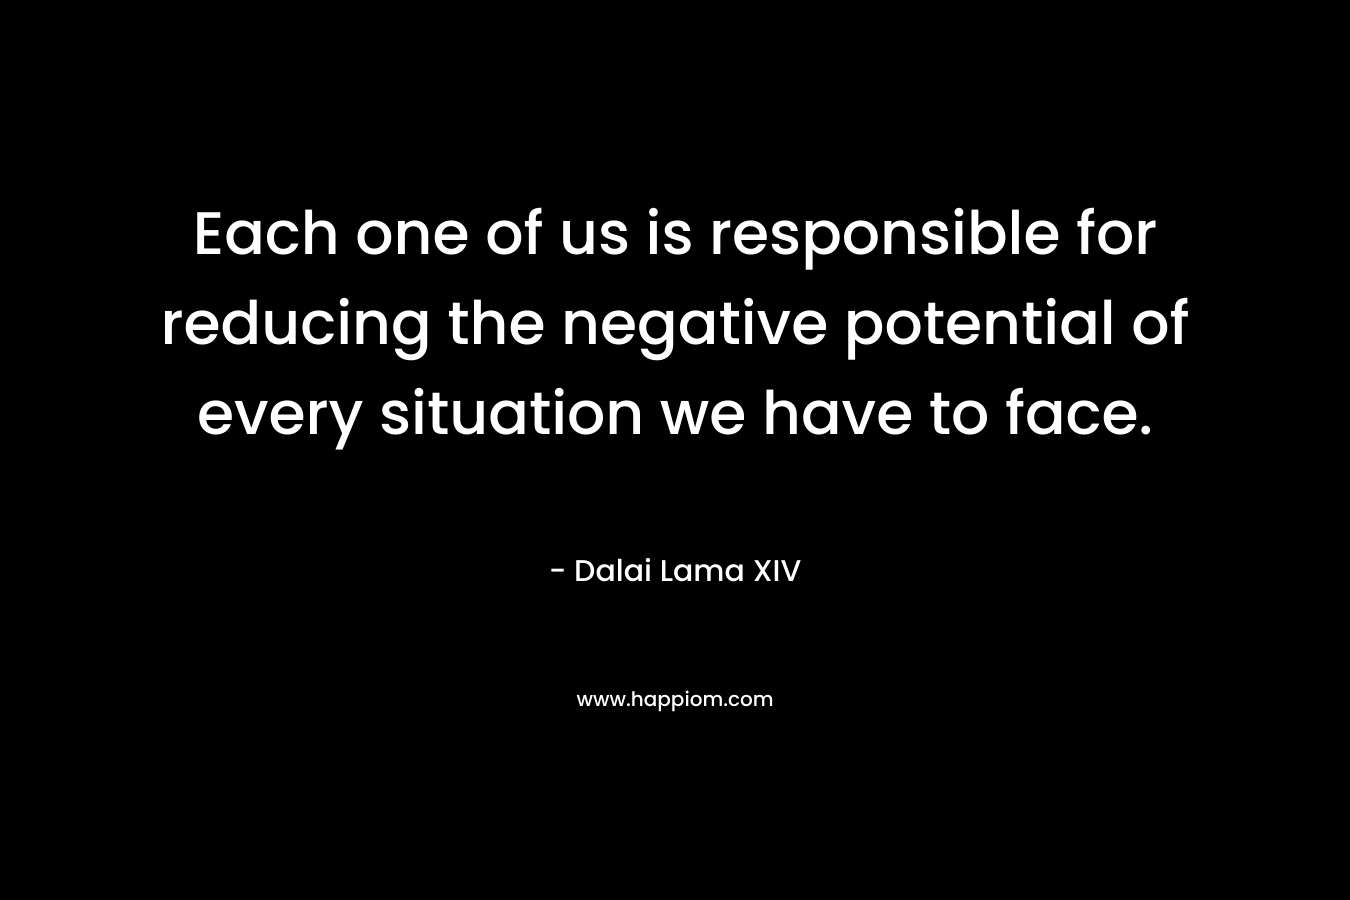 Each one of us is responsible for reducing the negative potential of every situation we have to face.